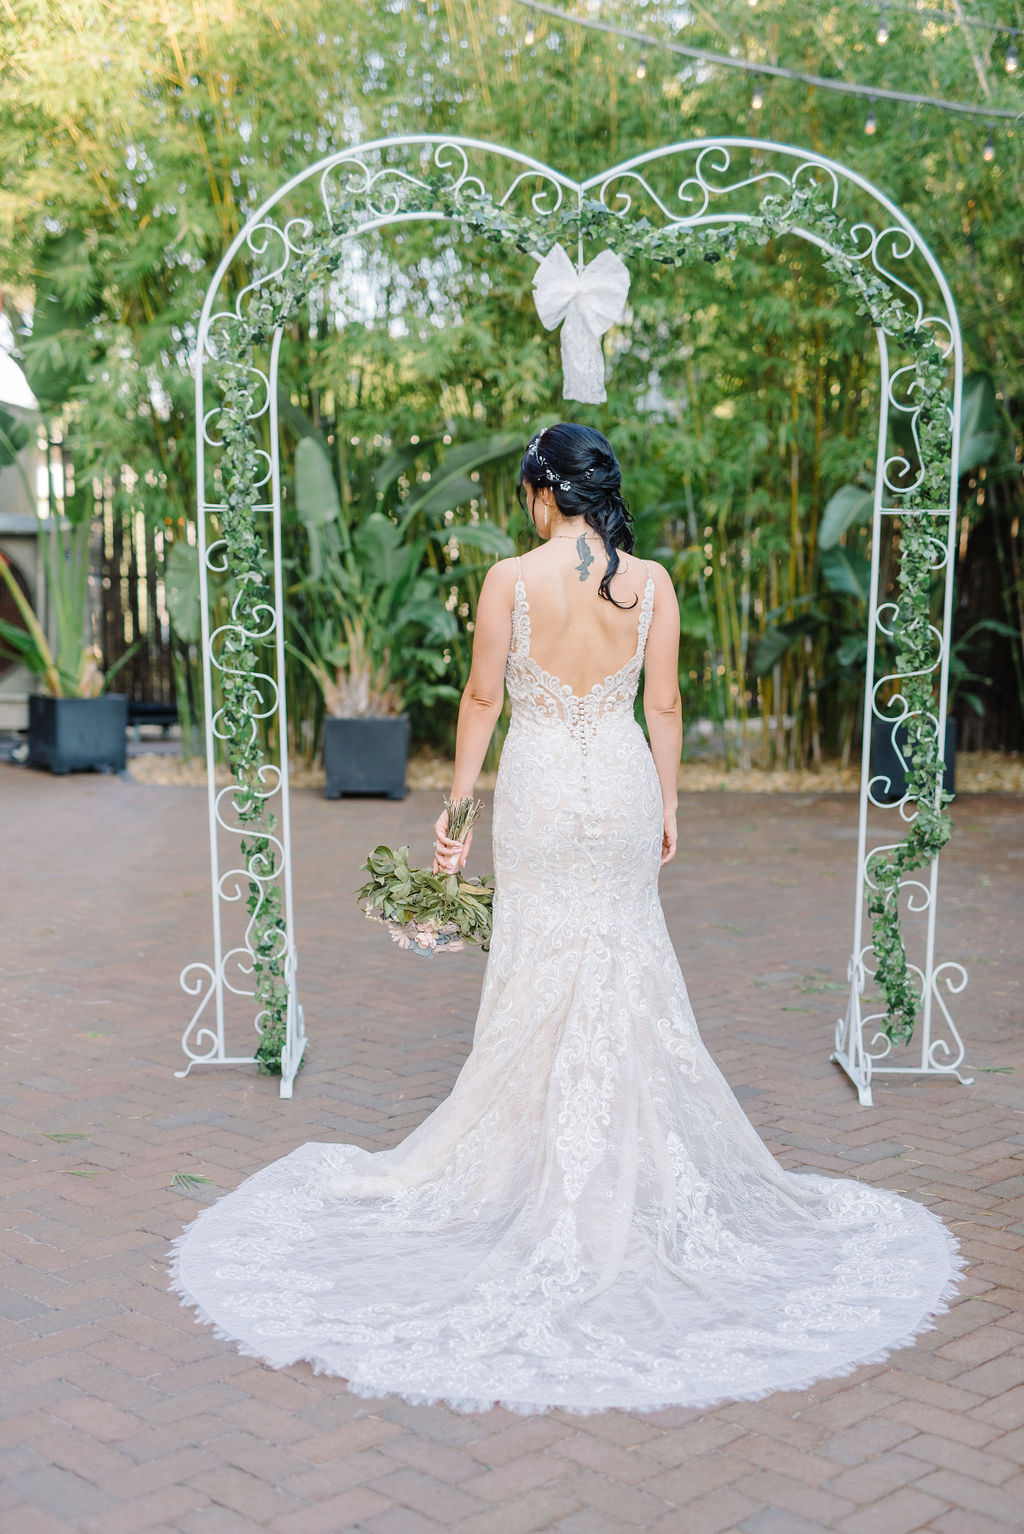 Bride in lace wedding dress under metal and greenery arch